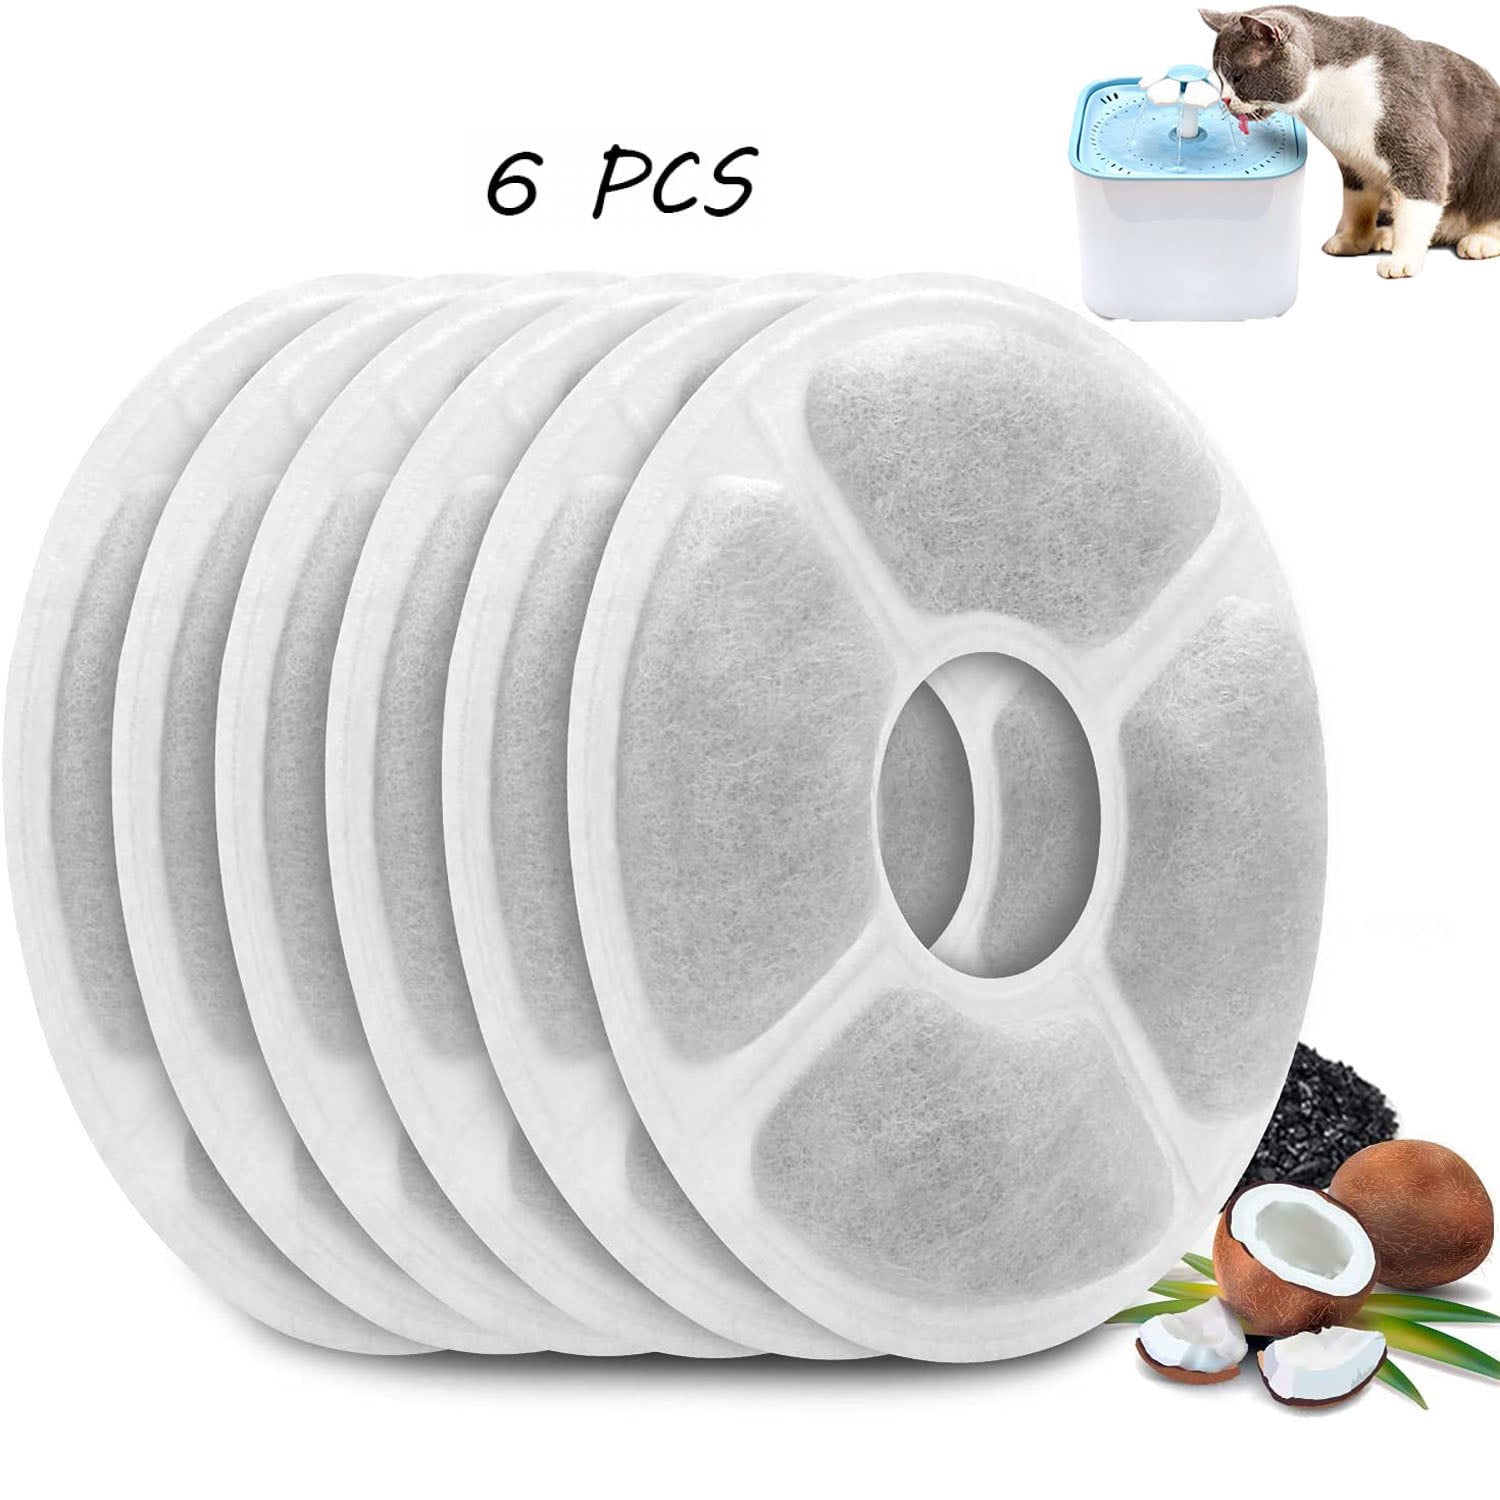 Pack of 4 LIMARIO Filters for Catit or Flower Design Senses Fountains and Catit Flower Fountains 